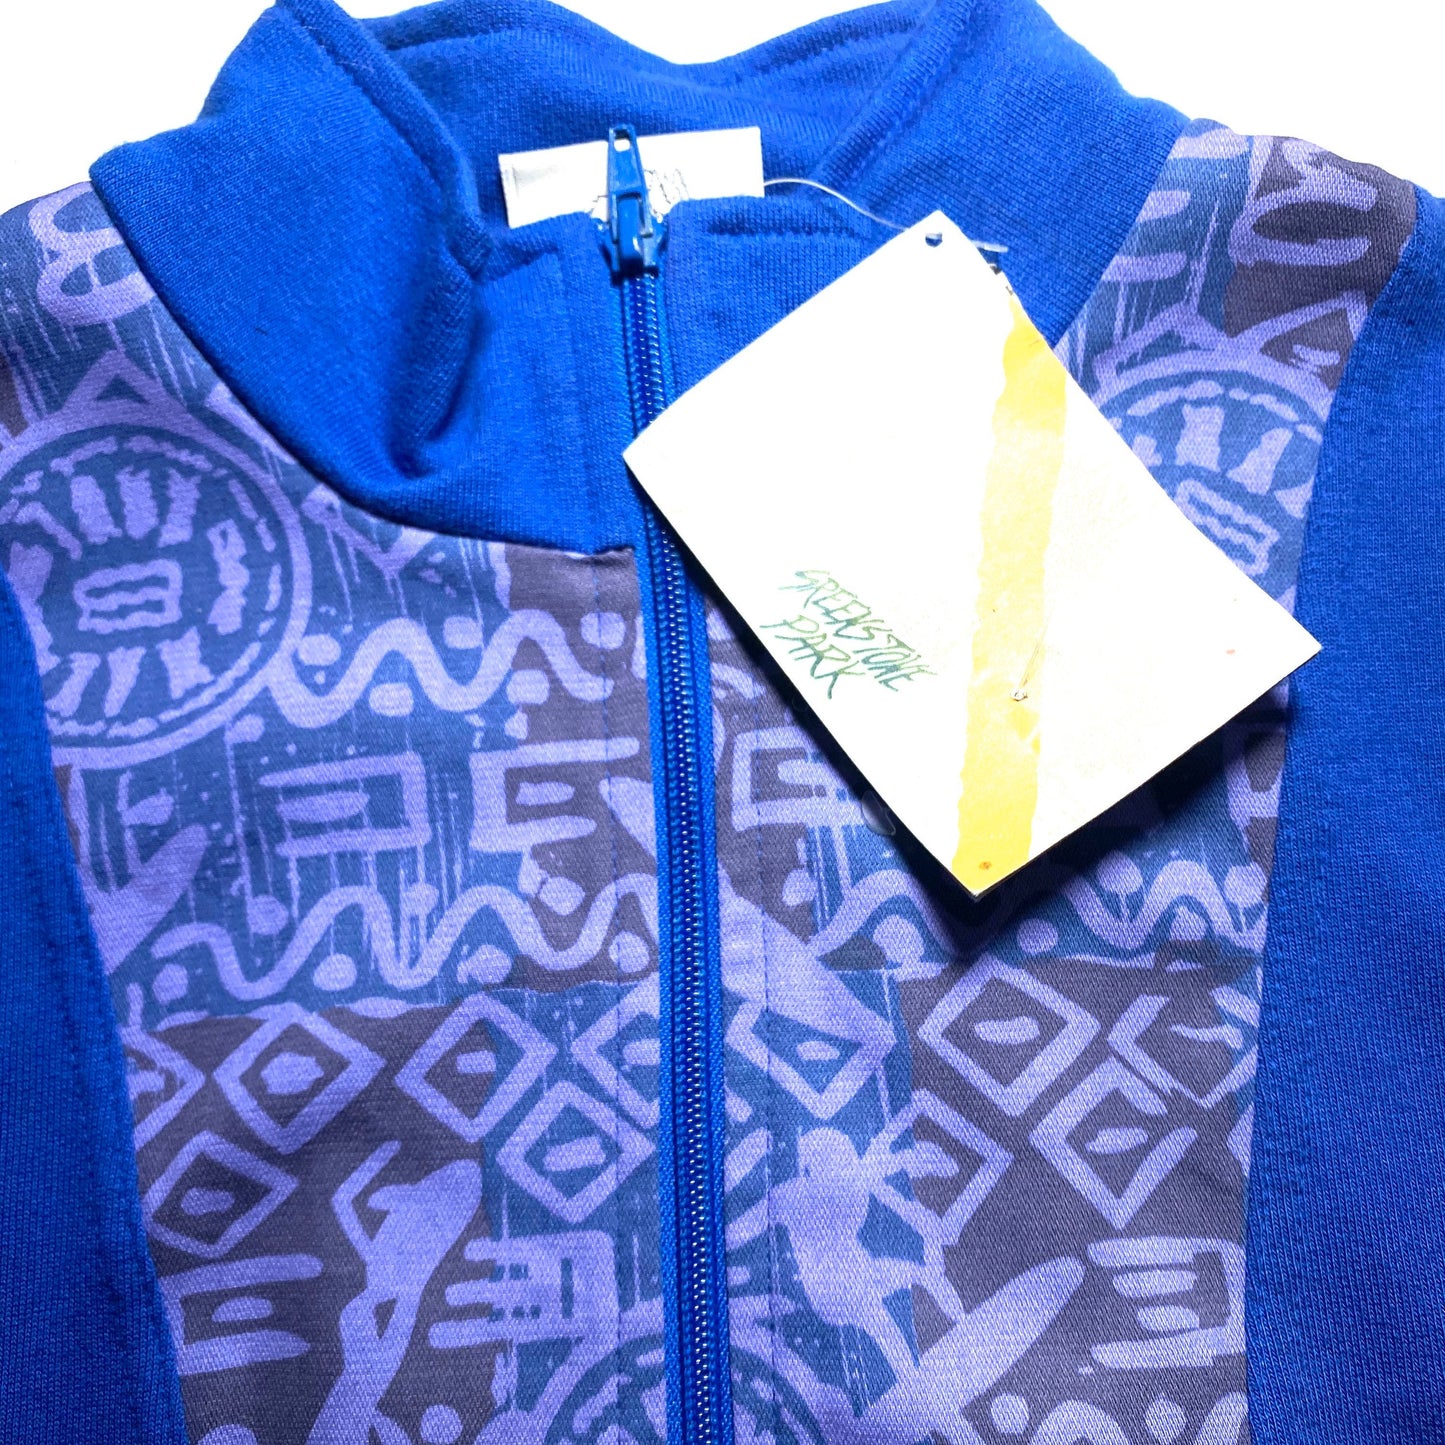 90s graffiti hip blue sweatshirt made in Italy by GreenStone, cool abstract inserts with surfer profiles, new w/tags